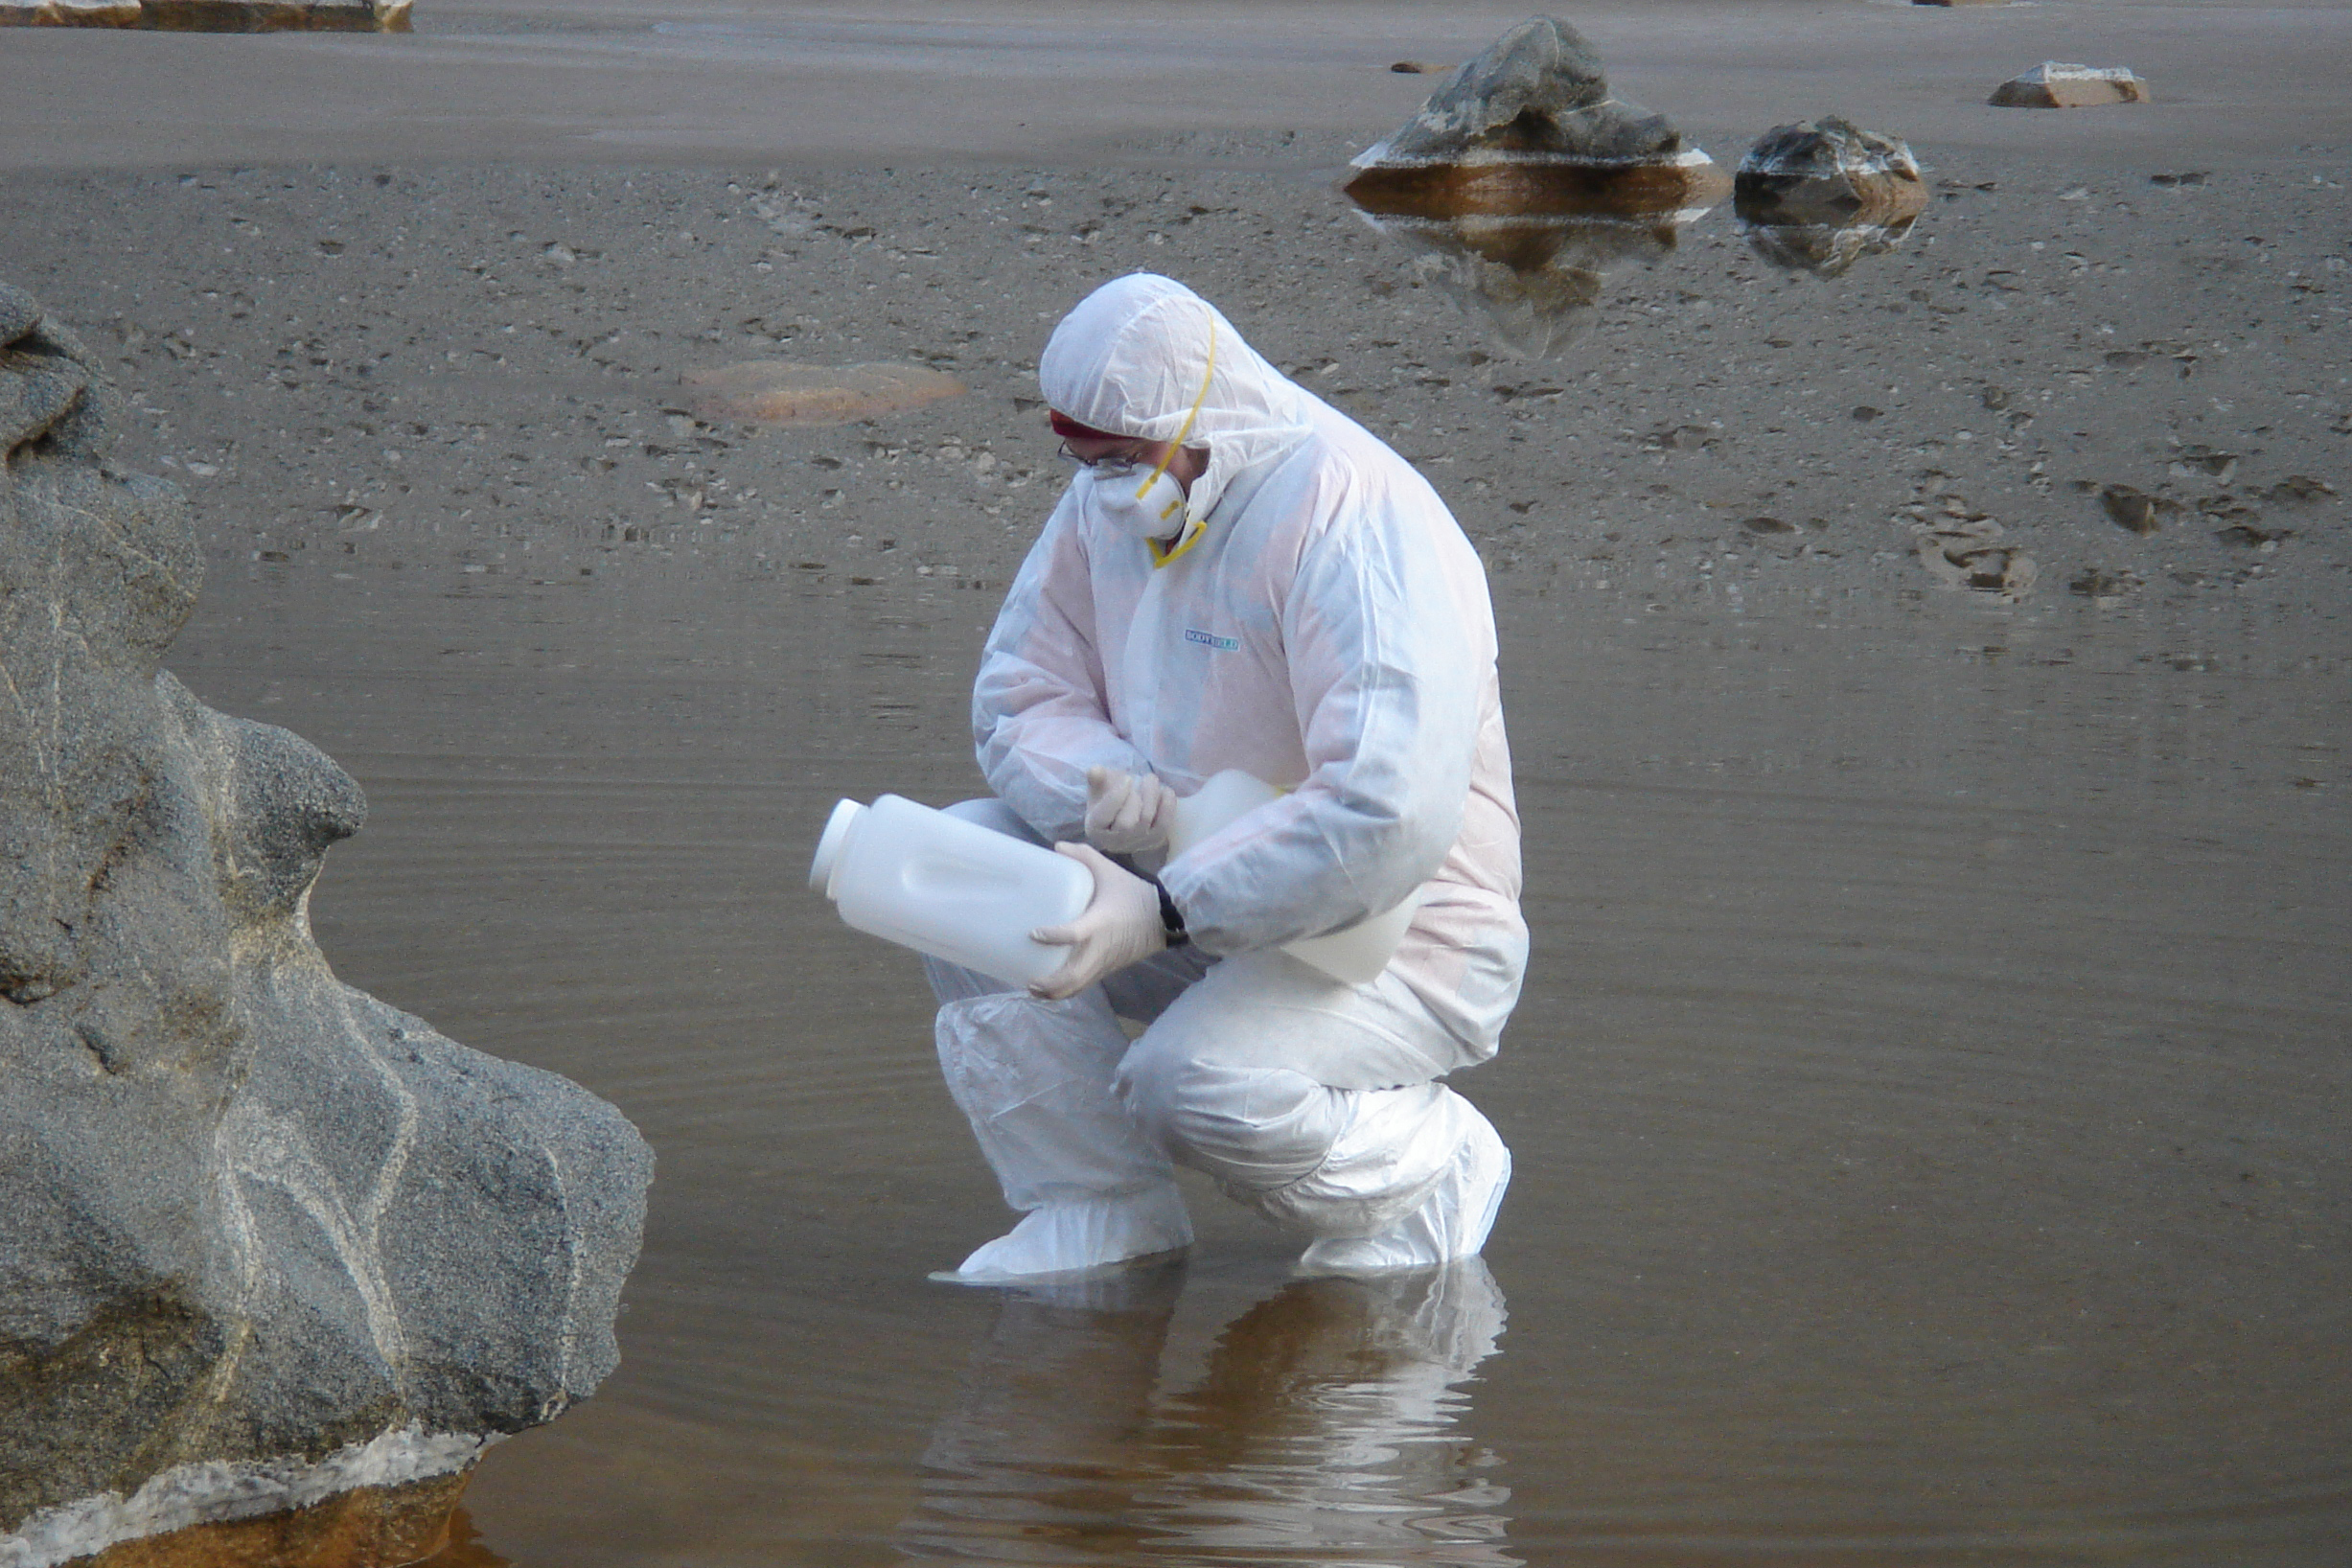 Man in white protective clothing works in shallow water.